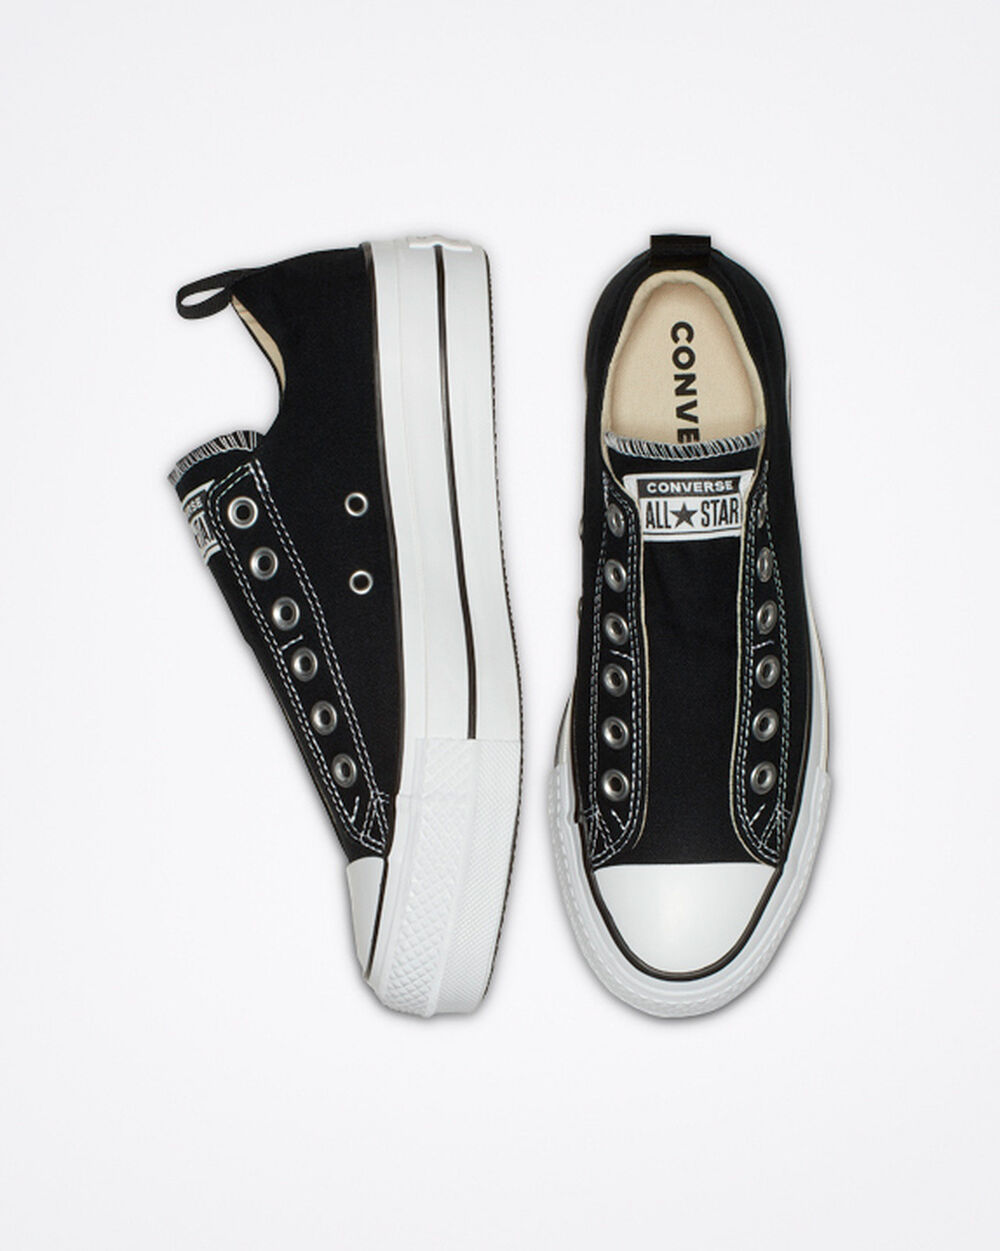 Tenis Converse Chuck Taylor All Star Mujer Negros Blancos Negros | Mexico-571026